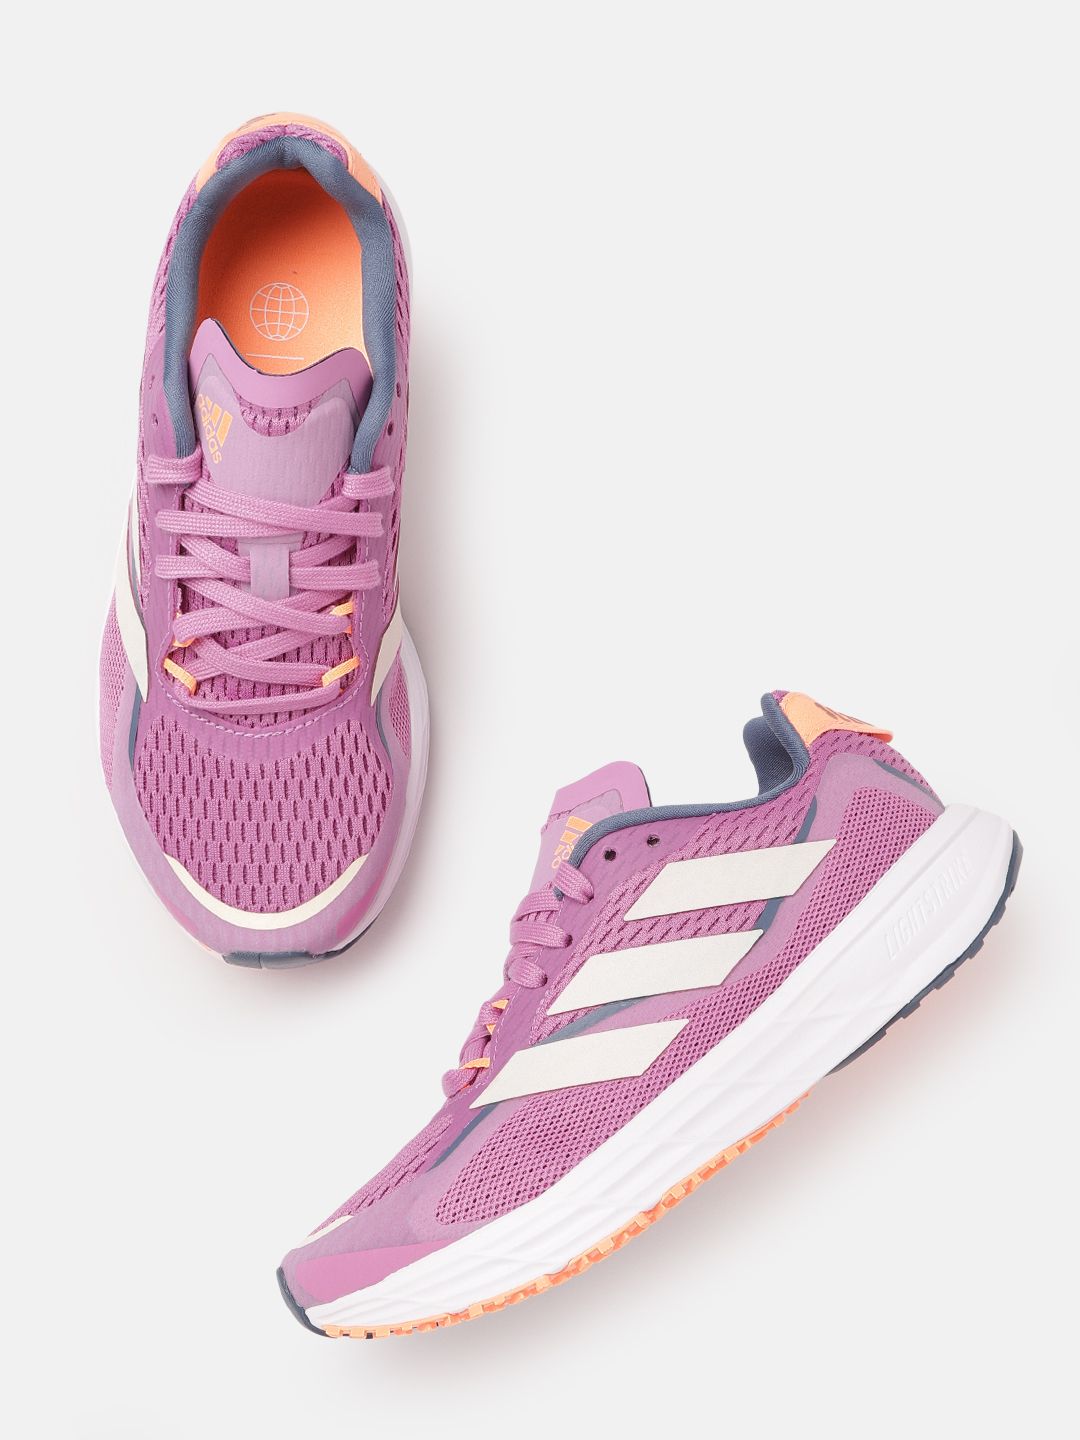 ADIDAS Women Purple Woven Design Perforated SL20.3 Running Shoes Price in India